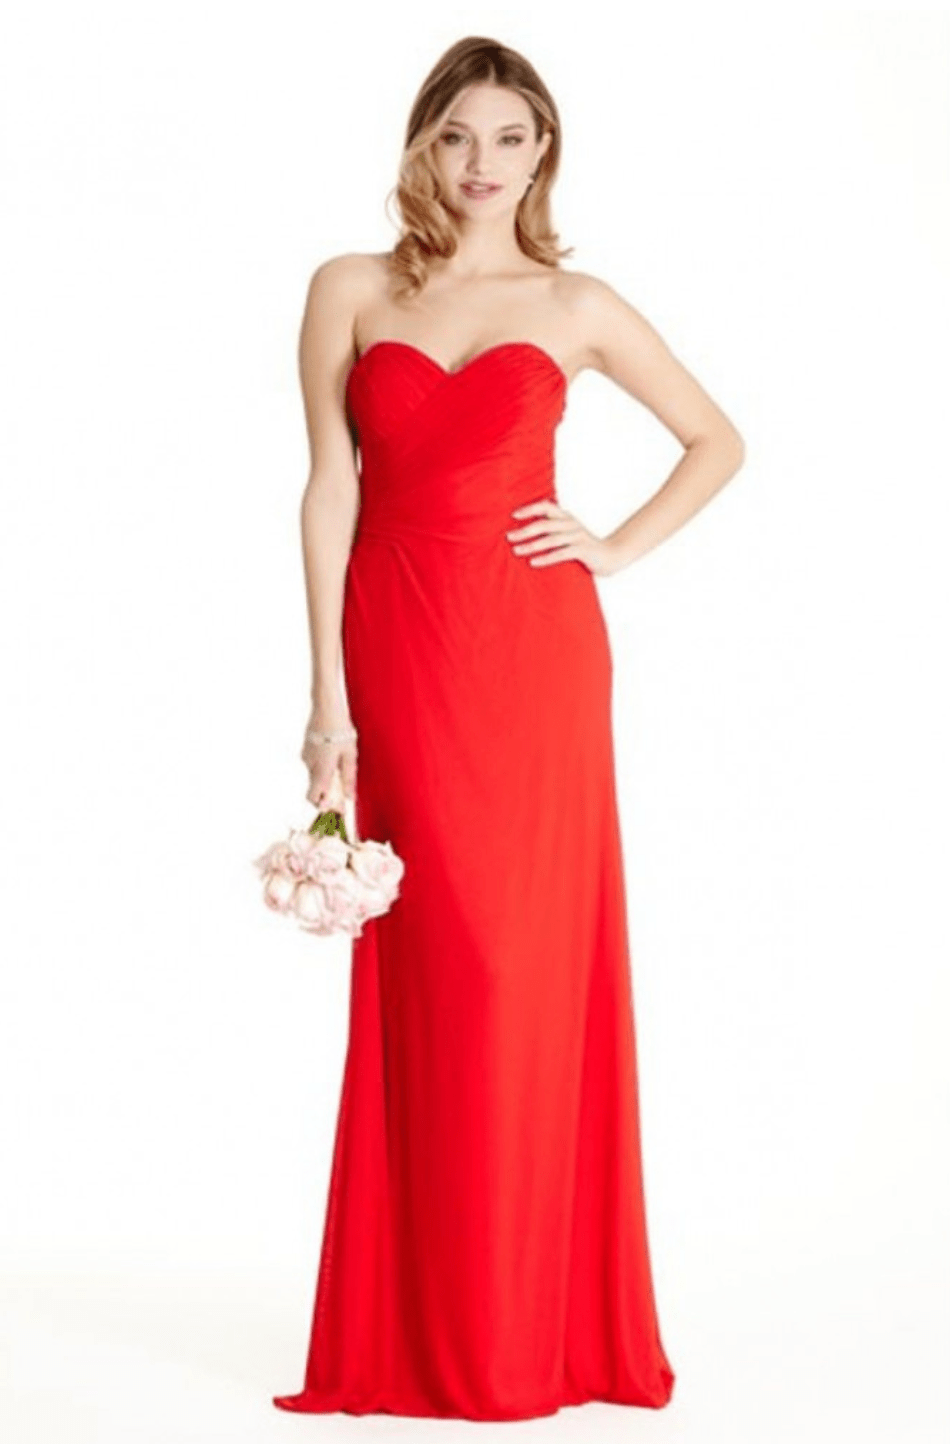 Strapless Ruched Dress by Aspeed - NORMA REED